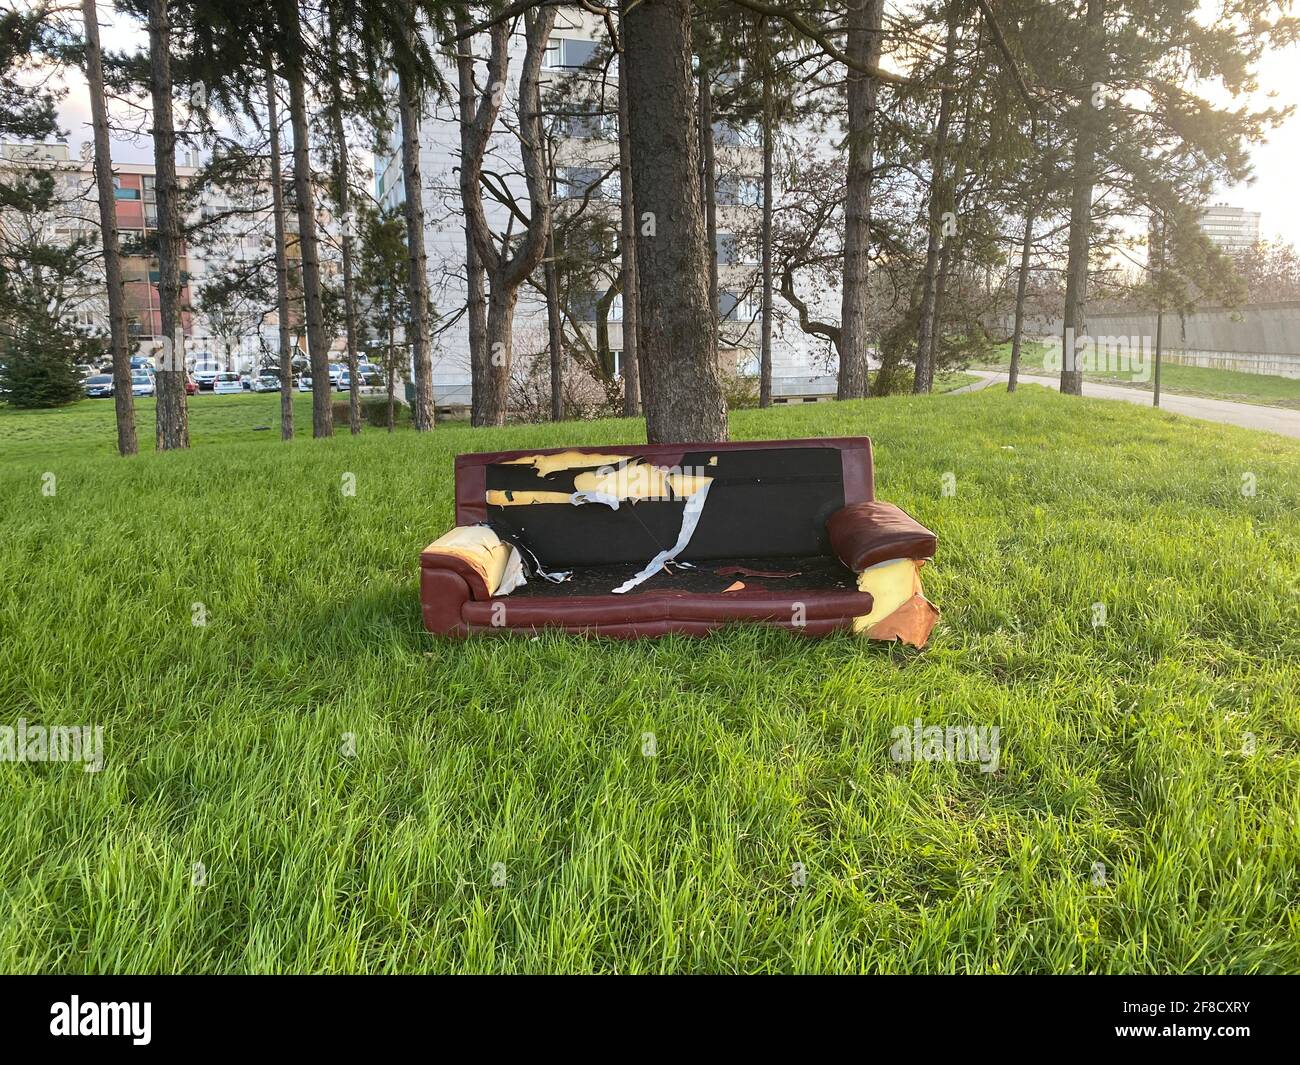 Waste Management - Damaged sofa thrown in the park carelessly. Improper waste disposal is one of the major problems all around the world. Stock Photo